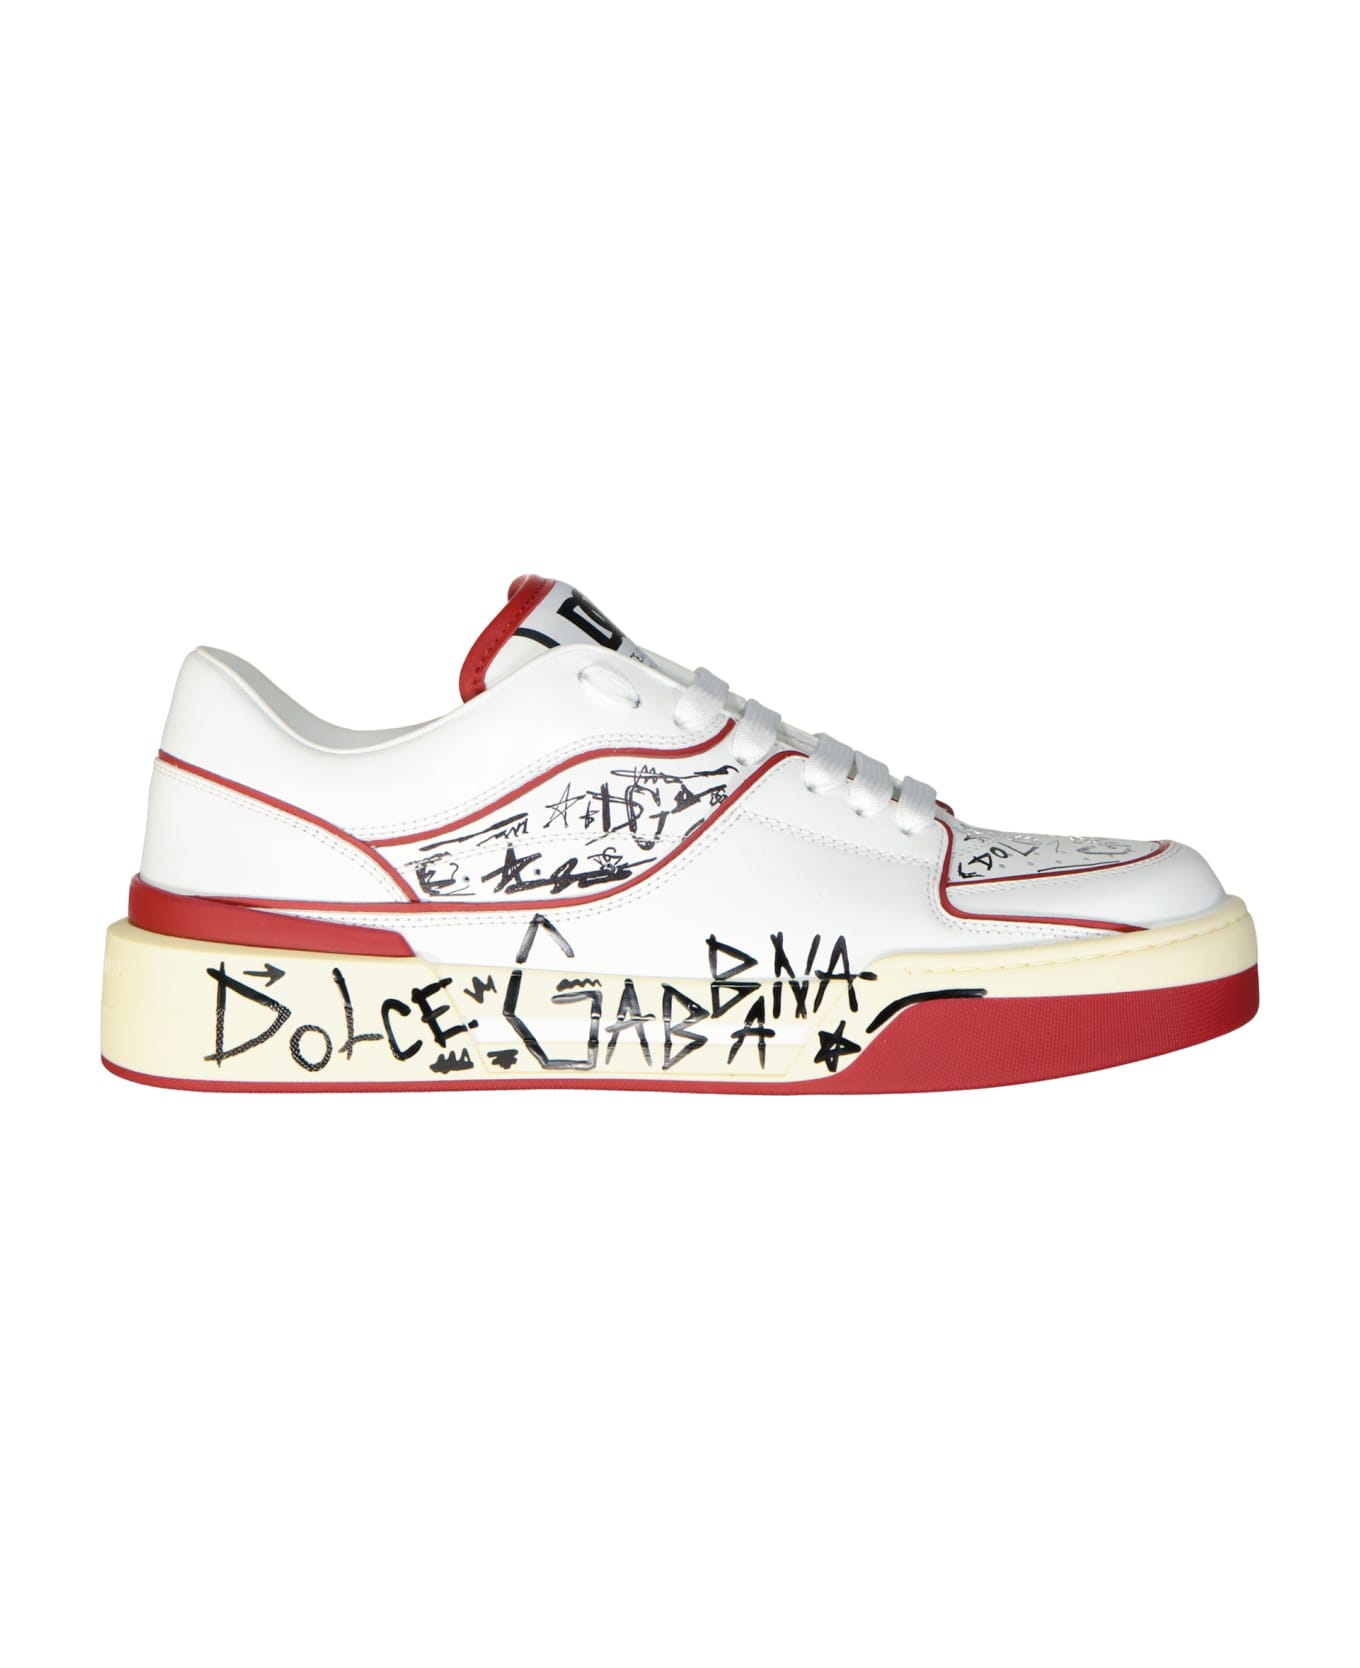 Dolce & Gabbana Printed Leather Sneakers - White スニーカー